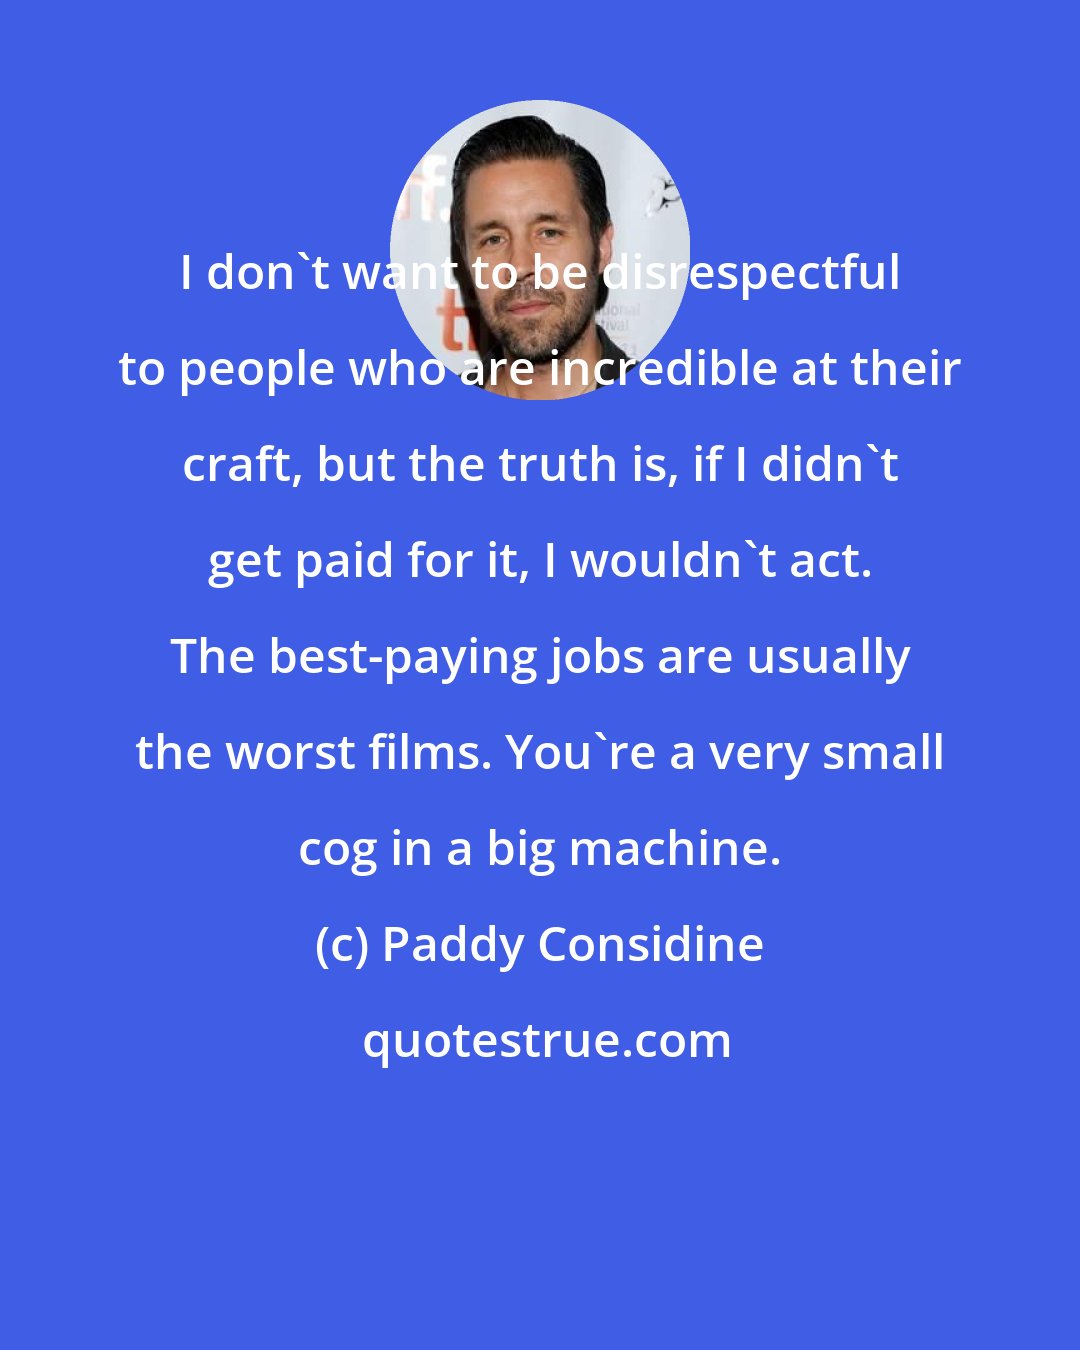 Paddy Considine: I don't want to be disrespectful to people who are incredible at their craft, but the truth is, if I didn't get paid for it, I wouldn't act. The best-paying jobs are usually the worst films. You're a very small cog in a big machine.